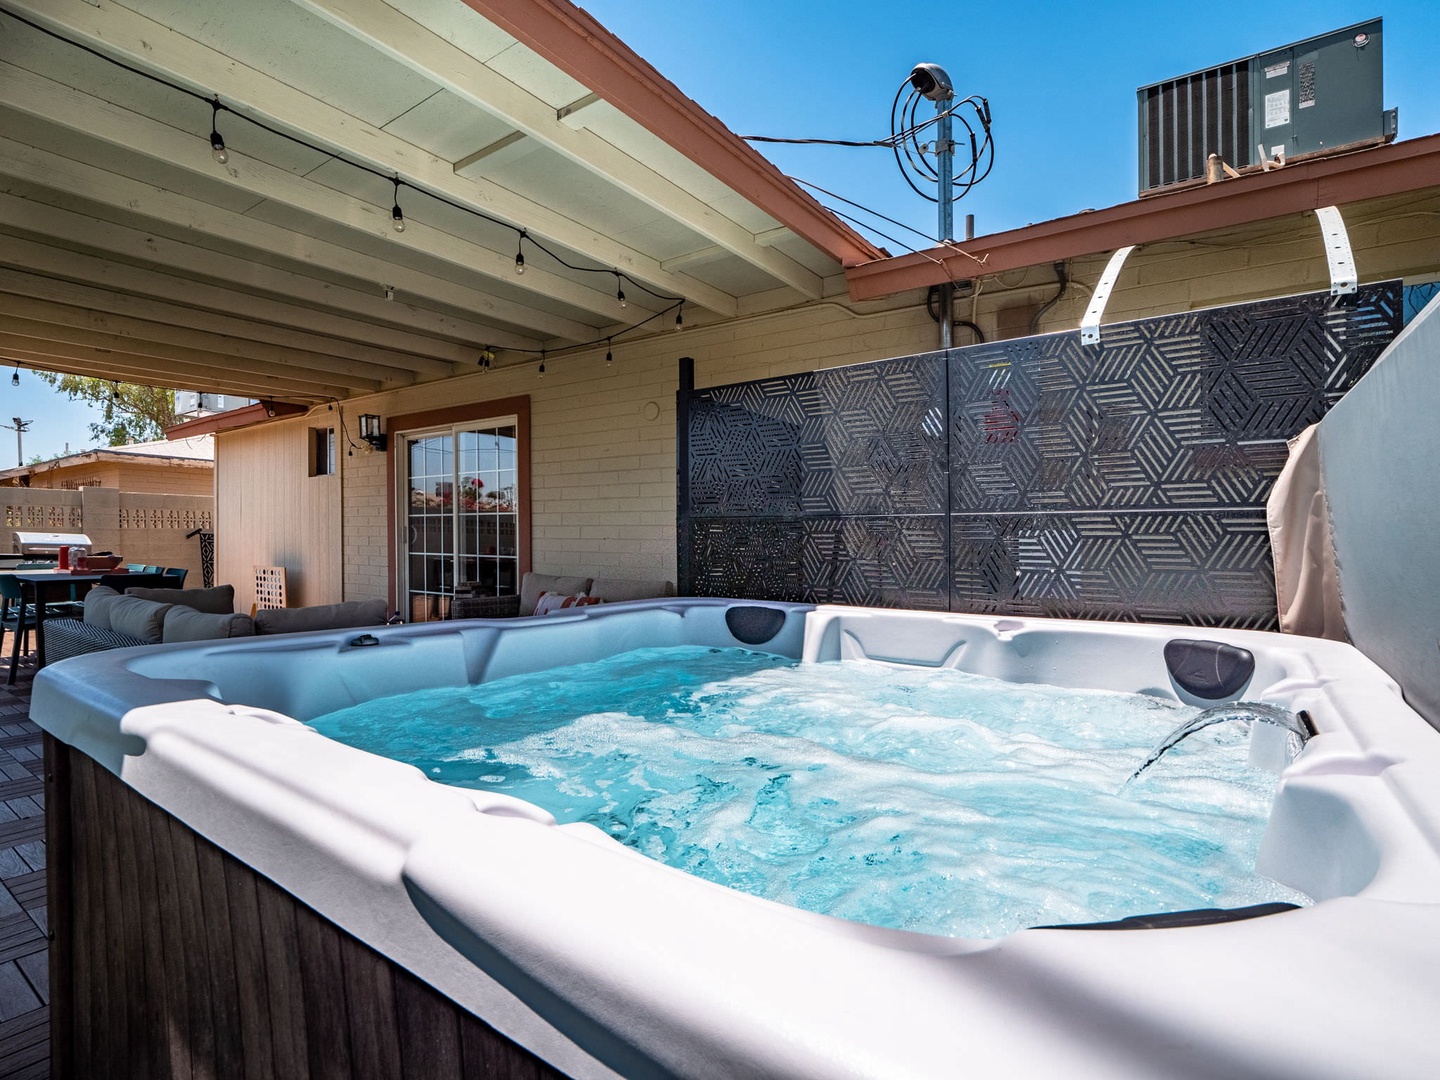 The hot tub is for exclusive use to the guests